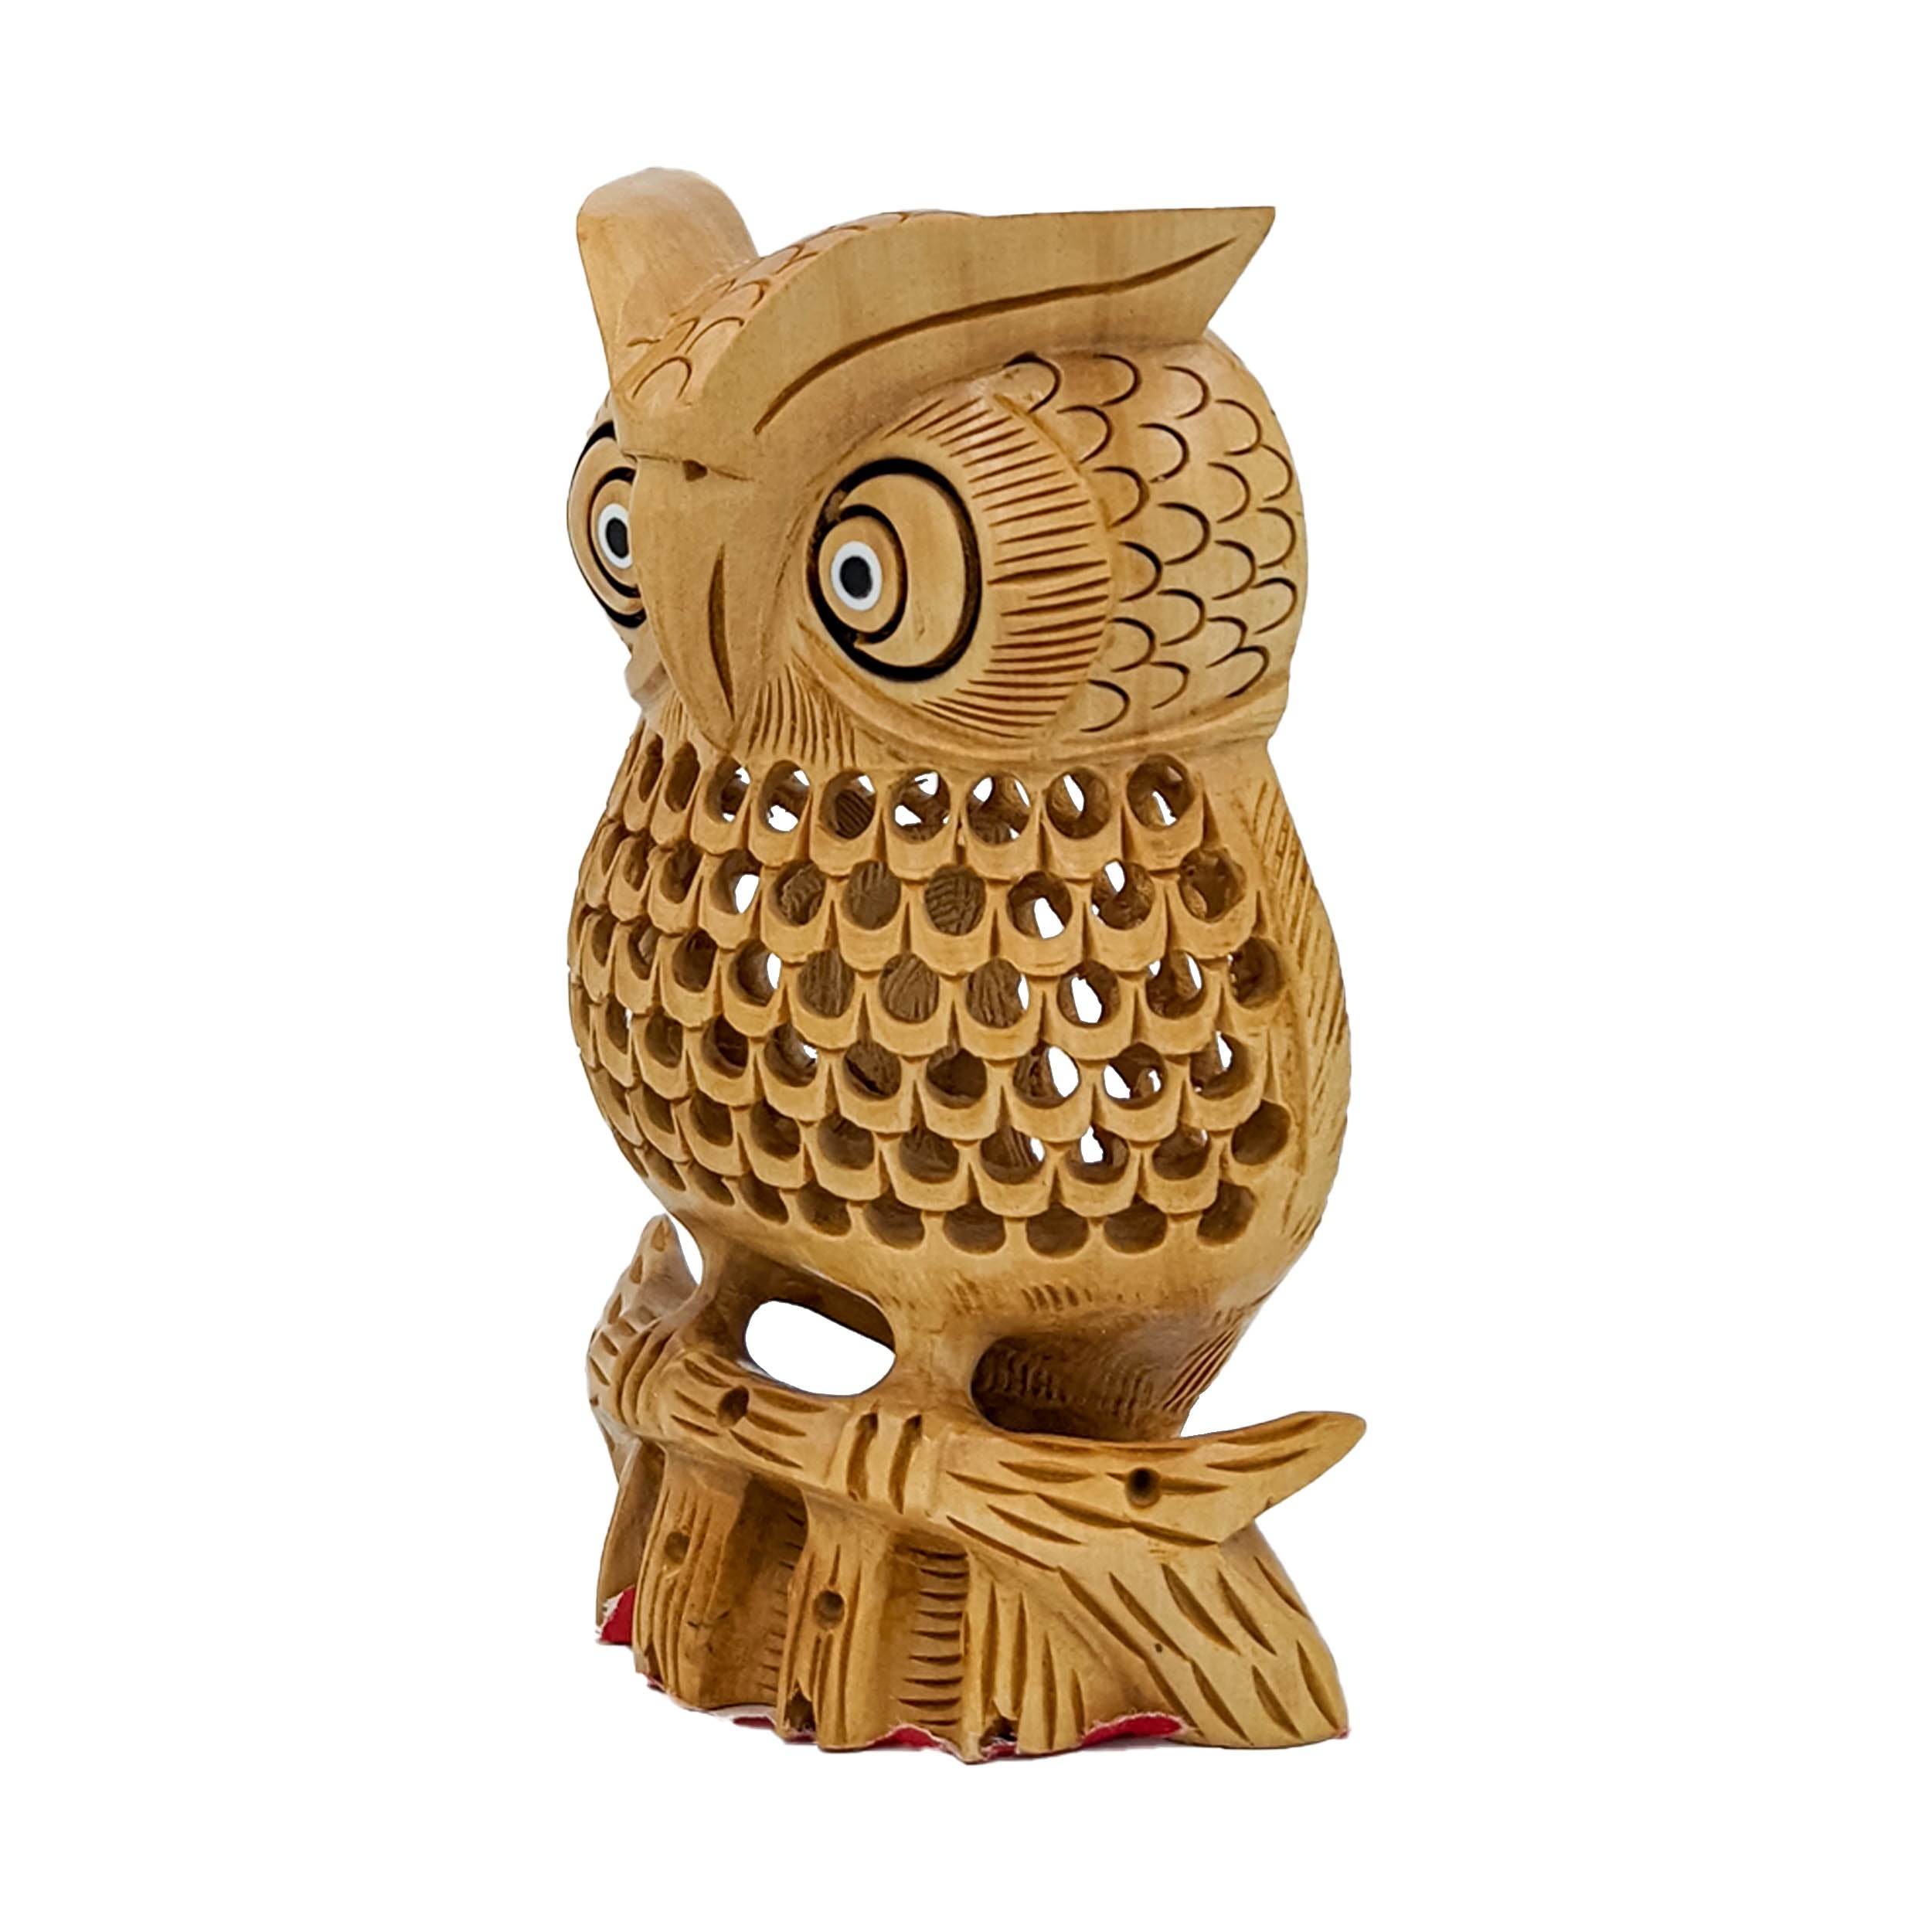 Handmade Wooden Carved Owl Statue